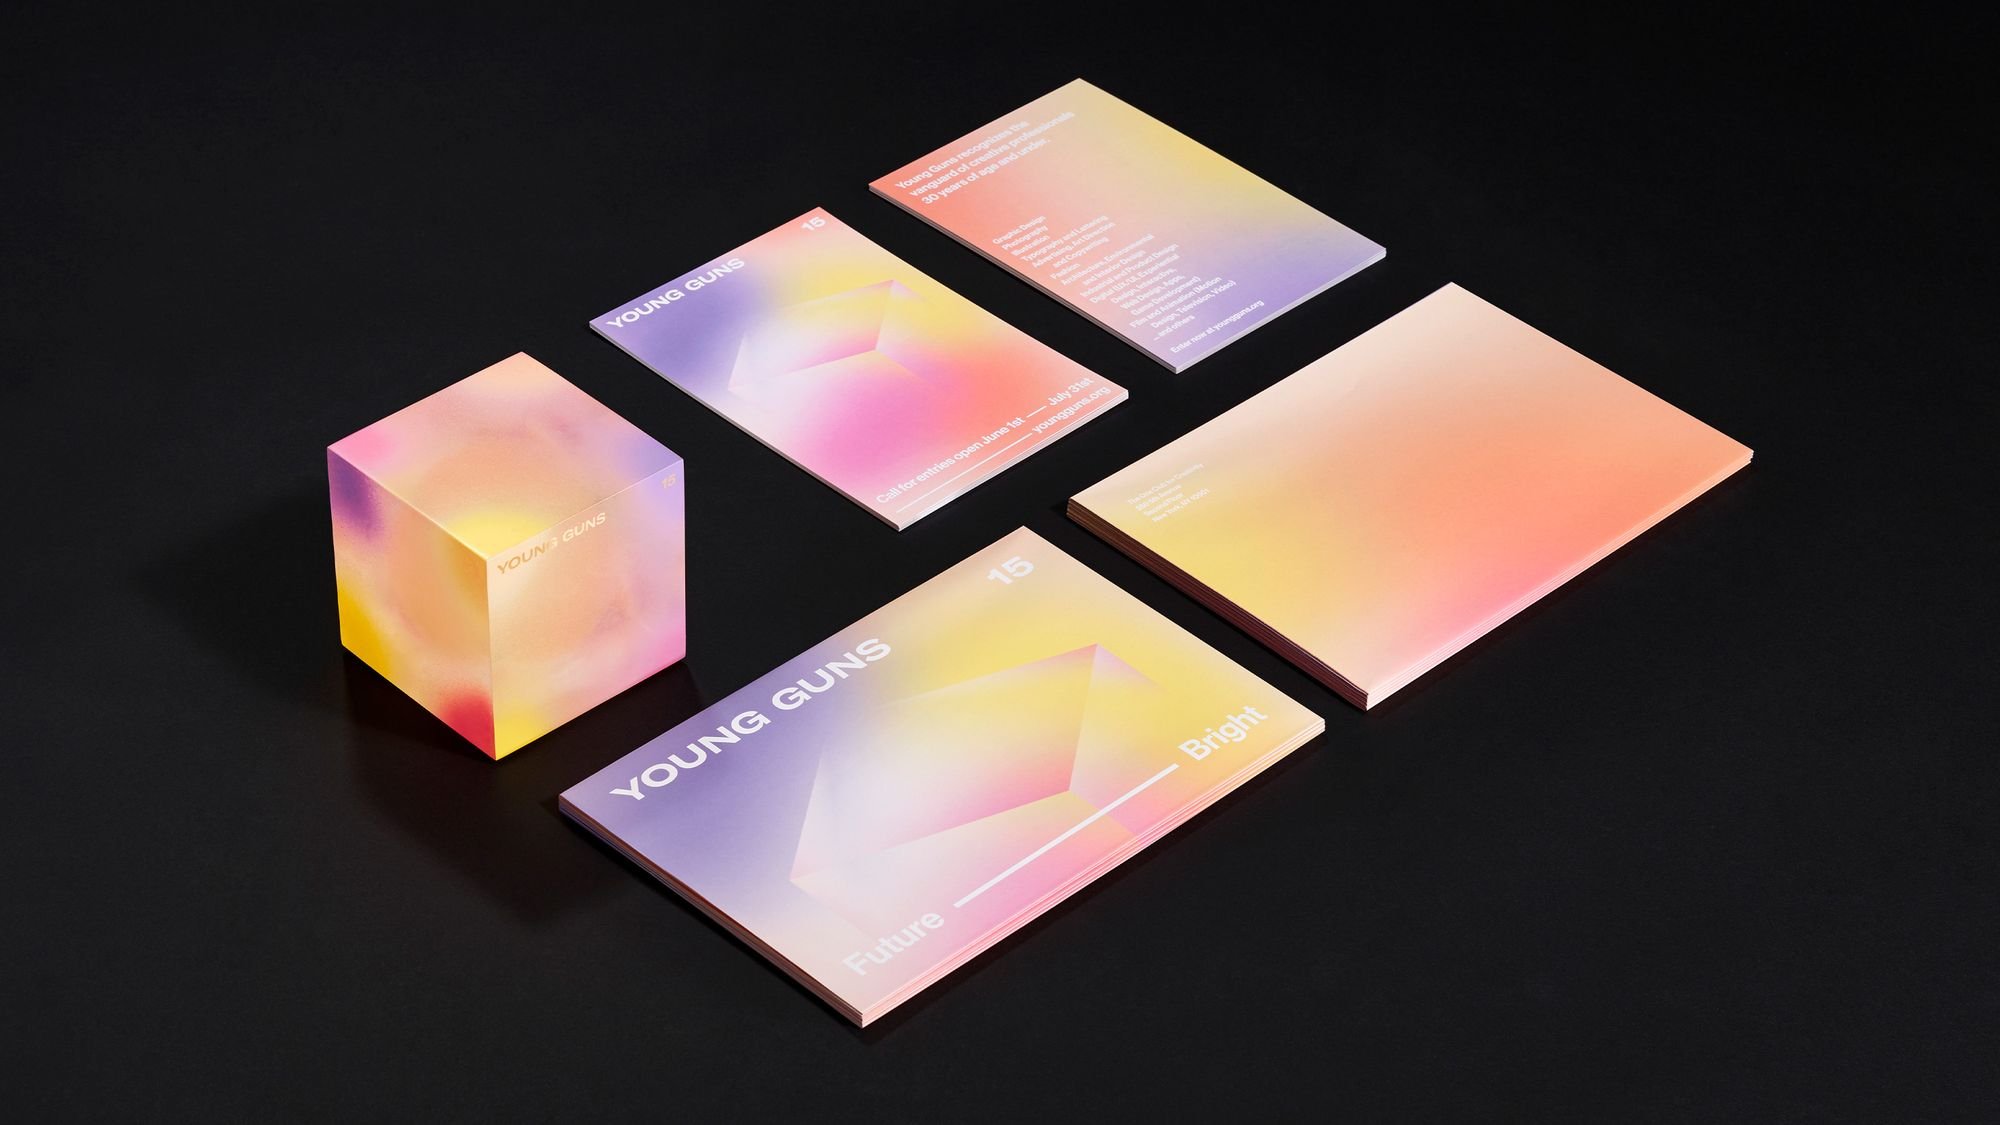 Young Guns printed materials in gradient color, Design by RoAndCo